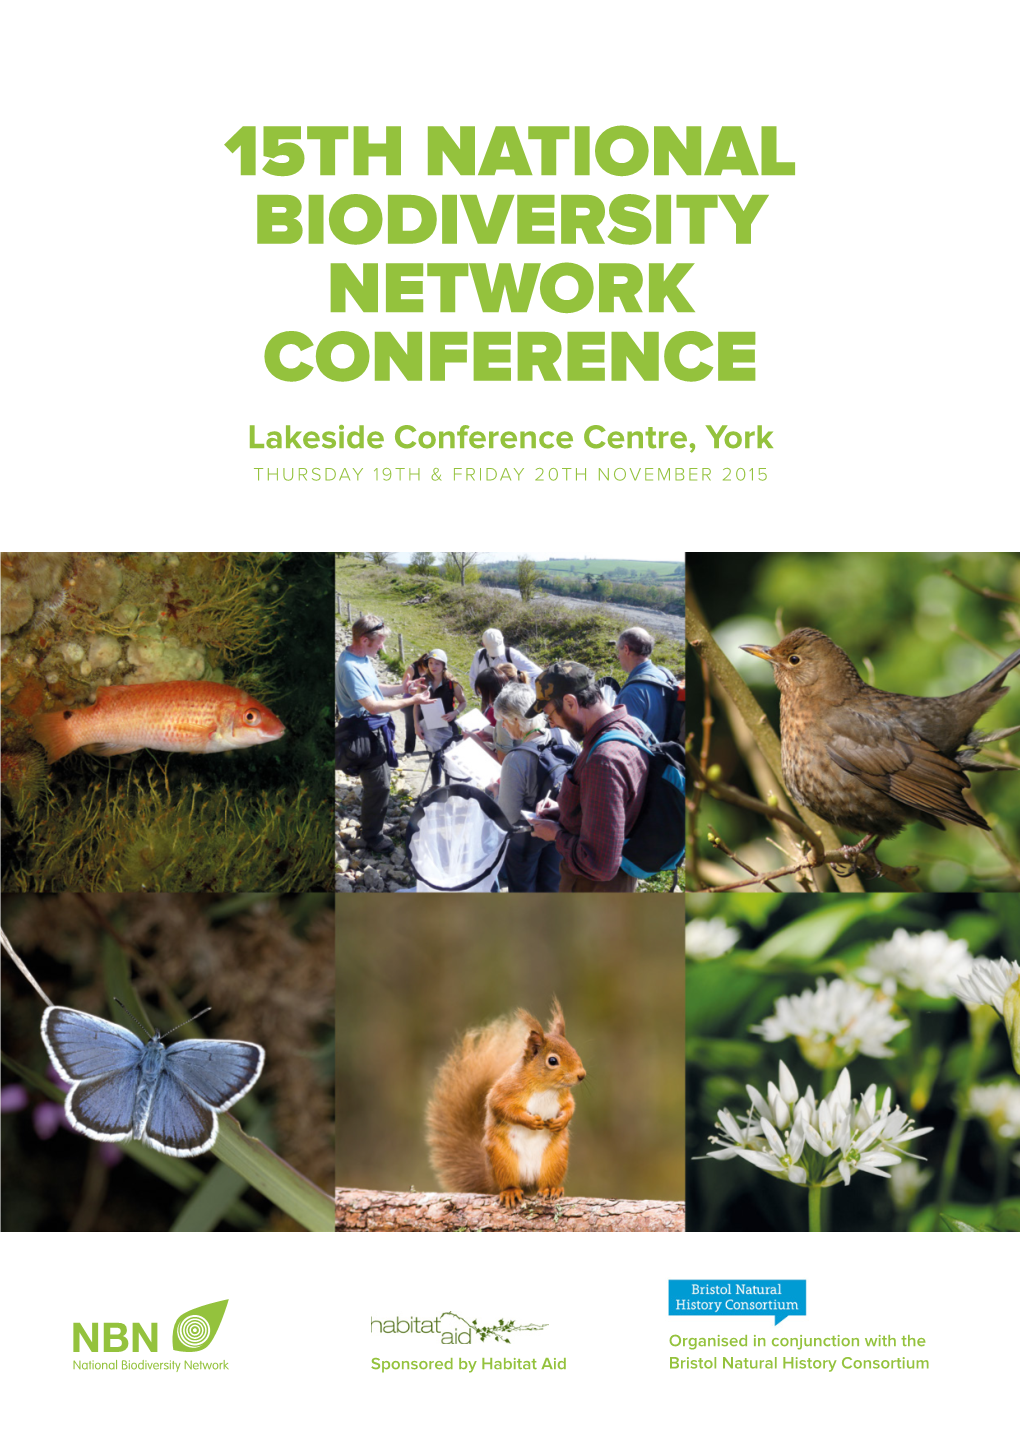 15TH NATIONAL BIODIVERSITY NETWORK CONFERENCE Lakeside Conference Centre, York THURSDAY 19TH & FRIDAY 20TH NOVEMBER 2015